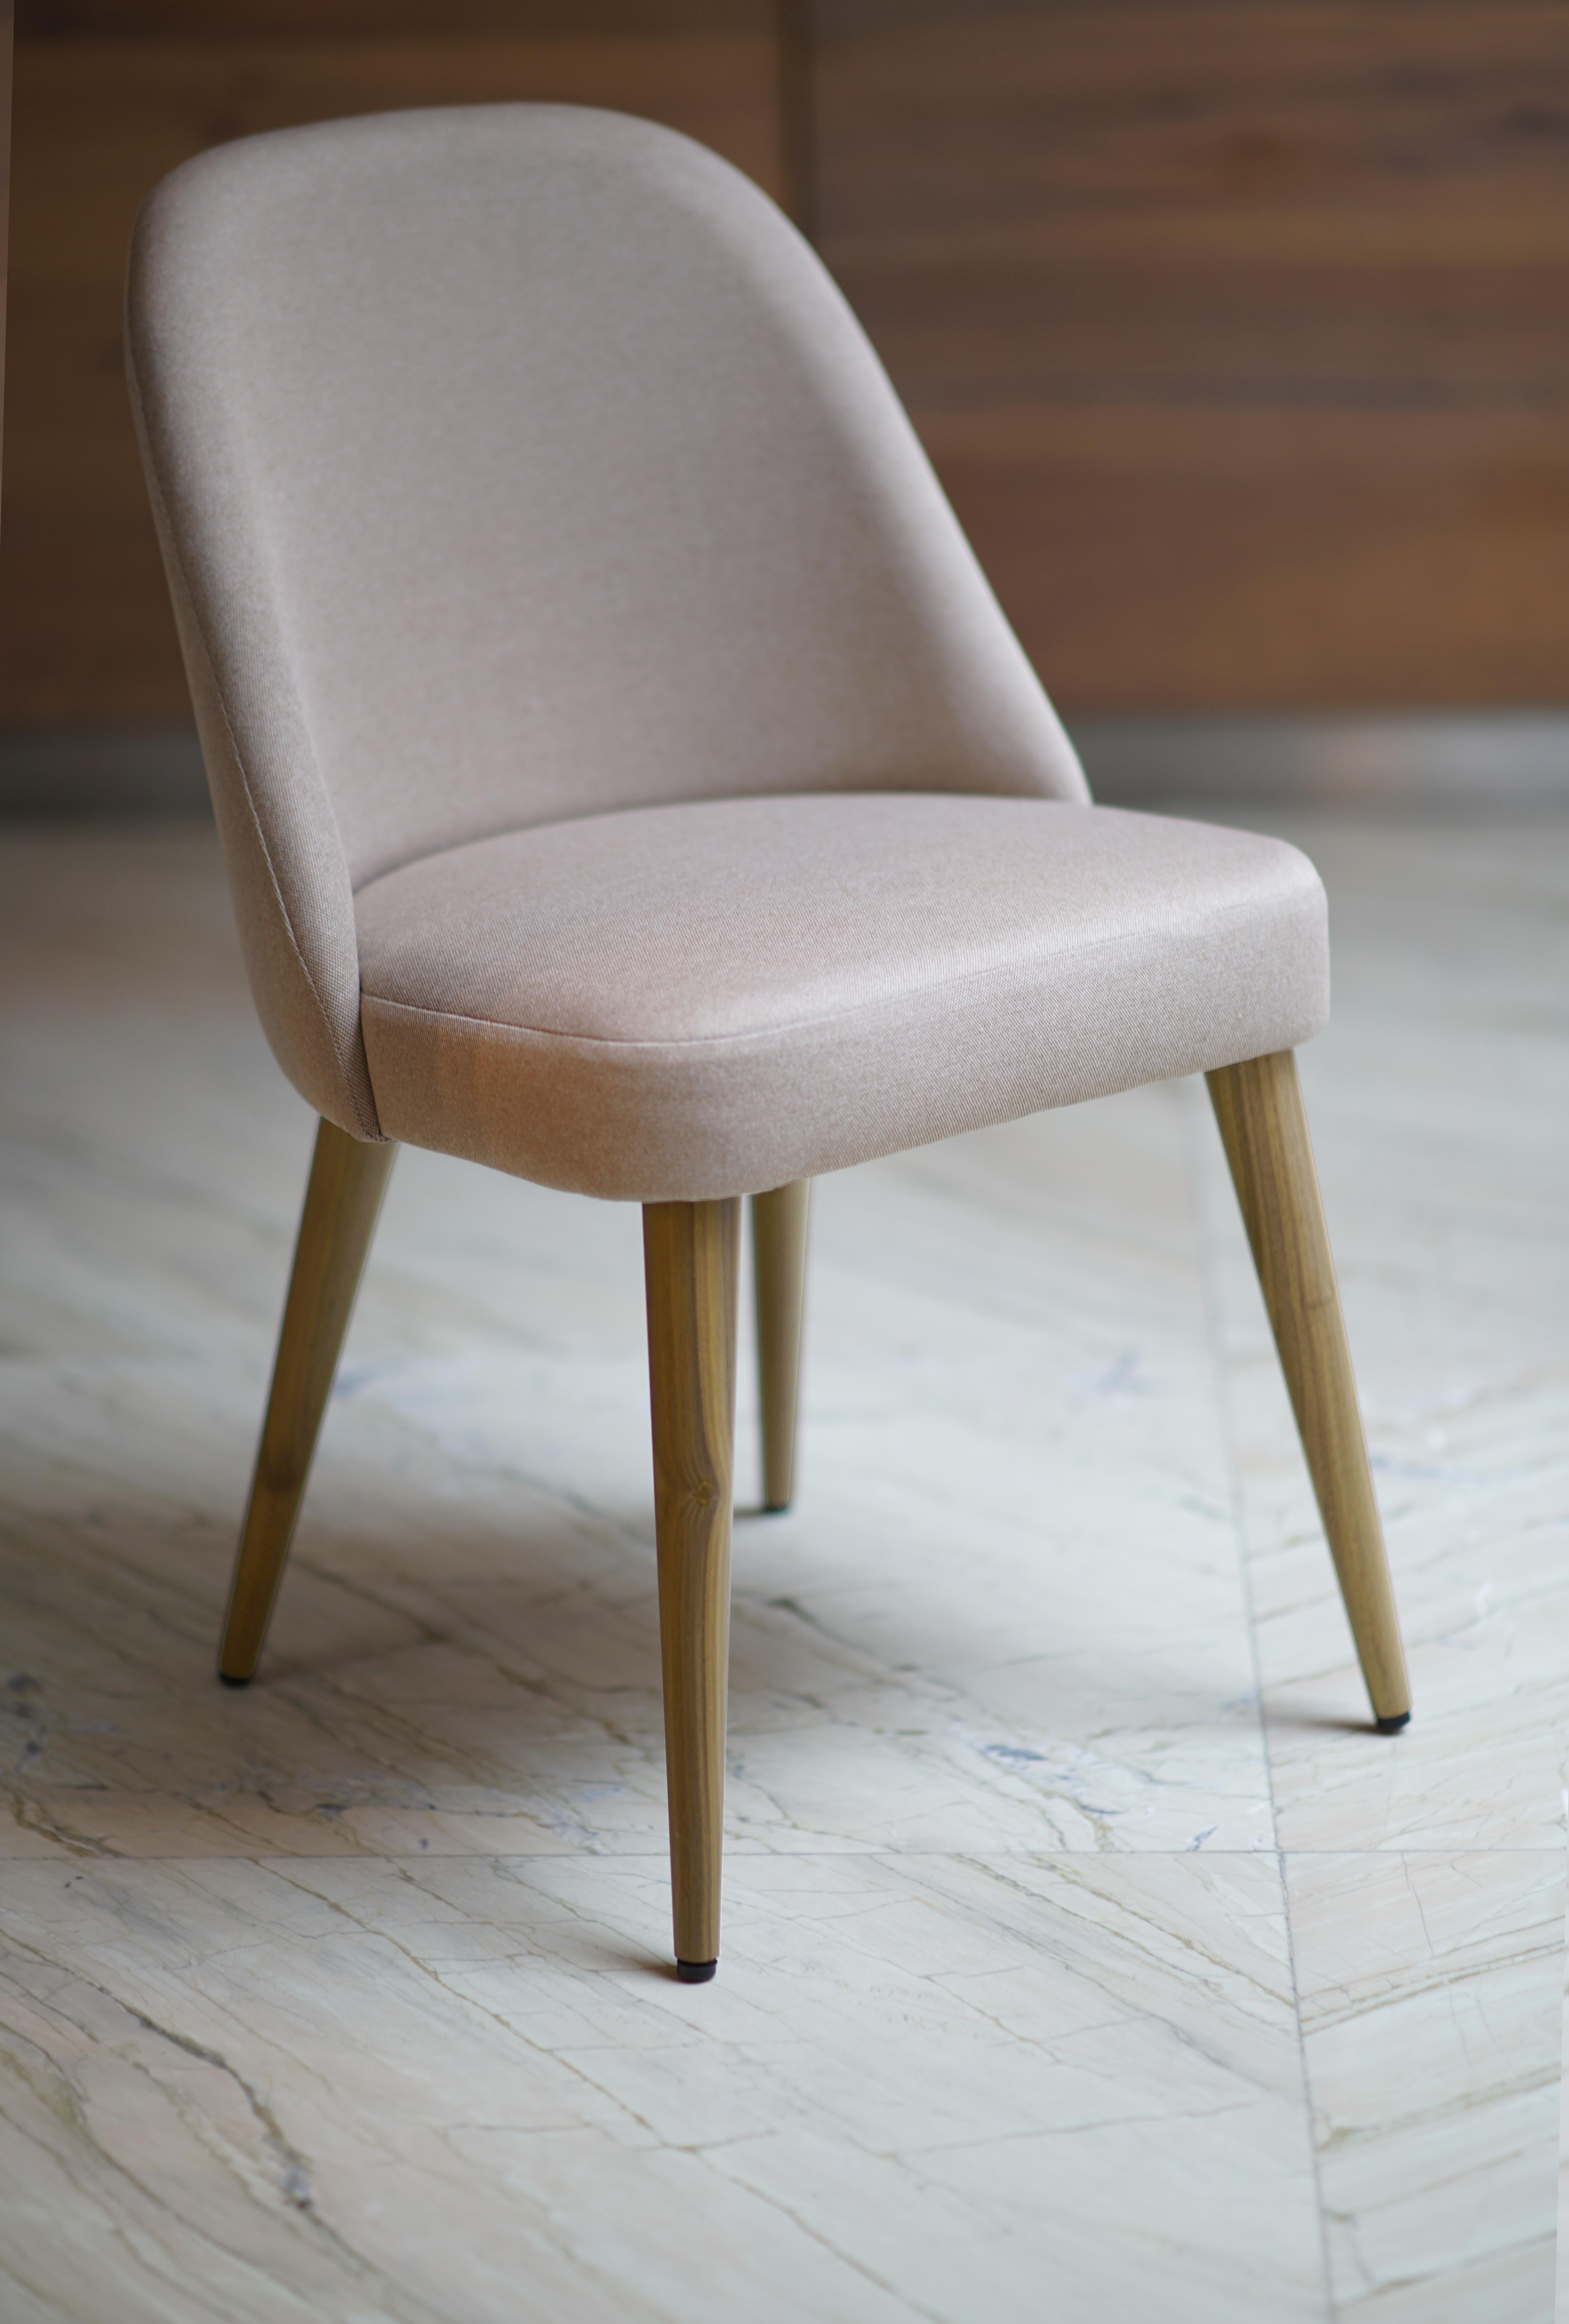 Helsinki collection. Helsinki chair: simple, elegant, comfortable. Available in oak and walnut base or in custom materials, may be upholstered with variety of fabrics and colors. Also available as an arm chair and stool. 

Our clients´ favorite